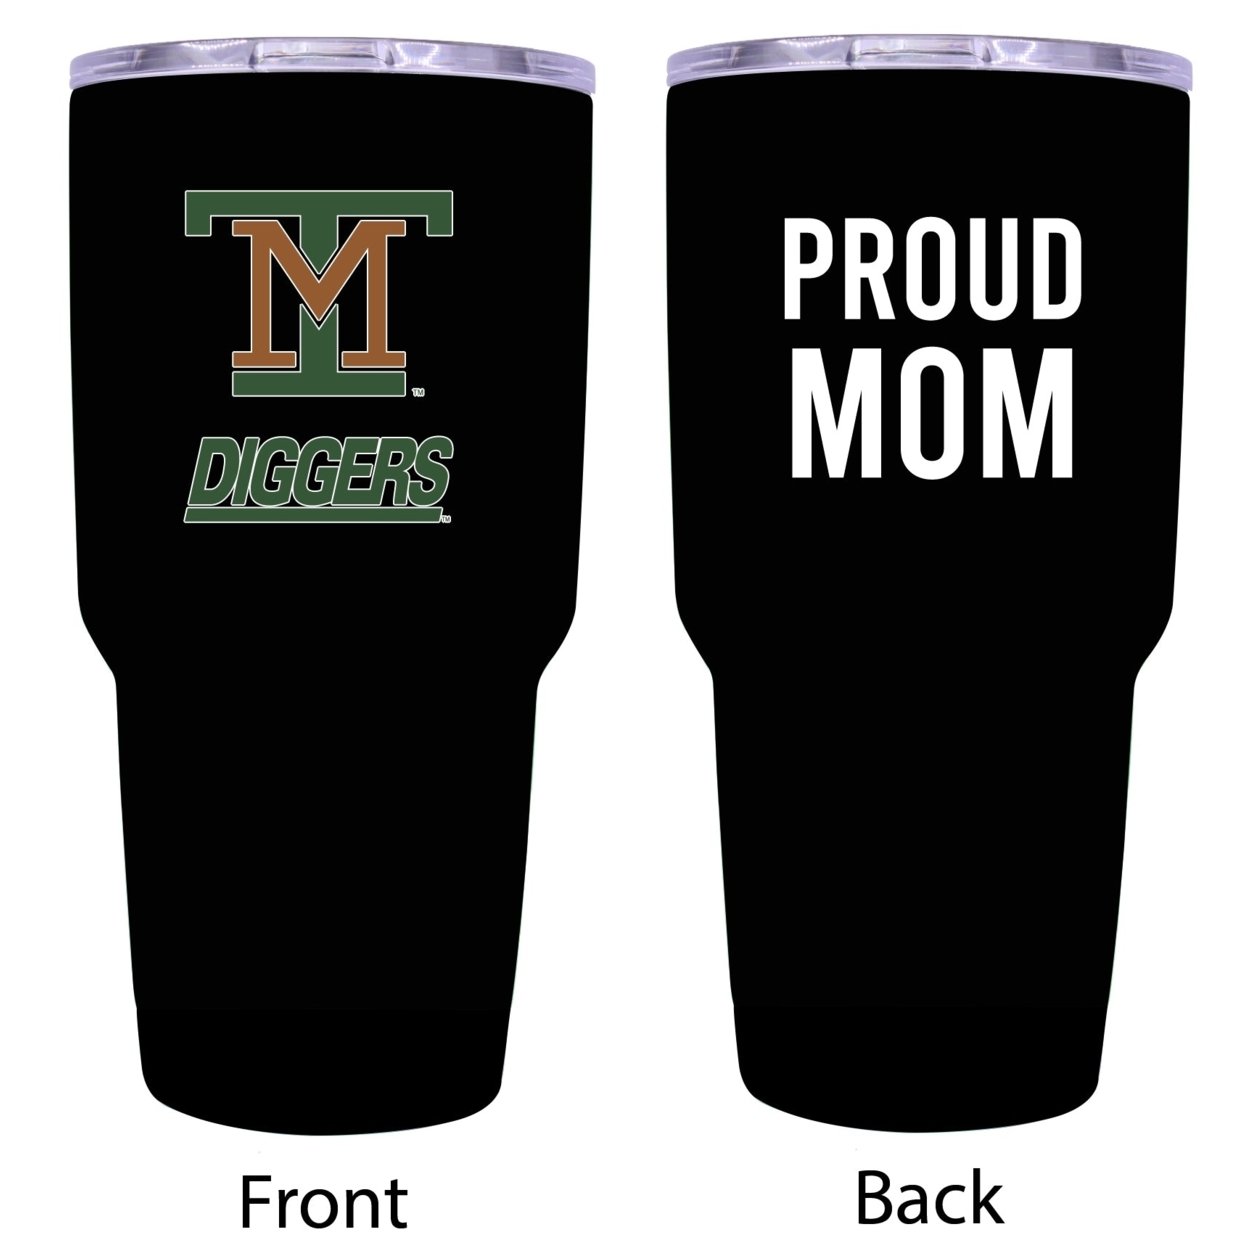 Montana Tech Proud Mom 24 Oz Insulated Stainless Steel Tumbler